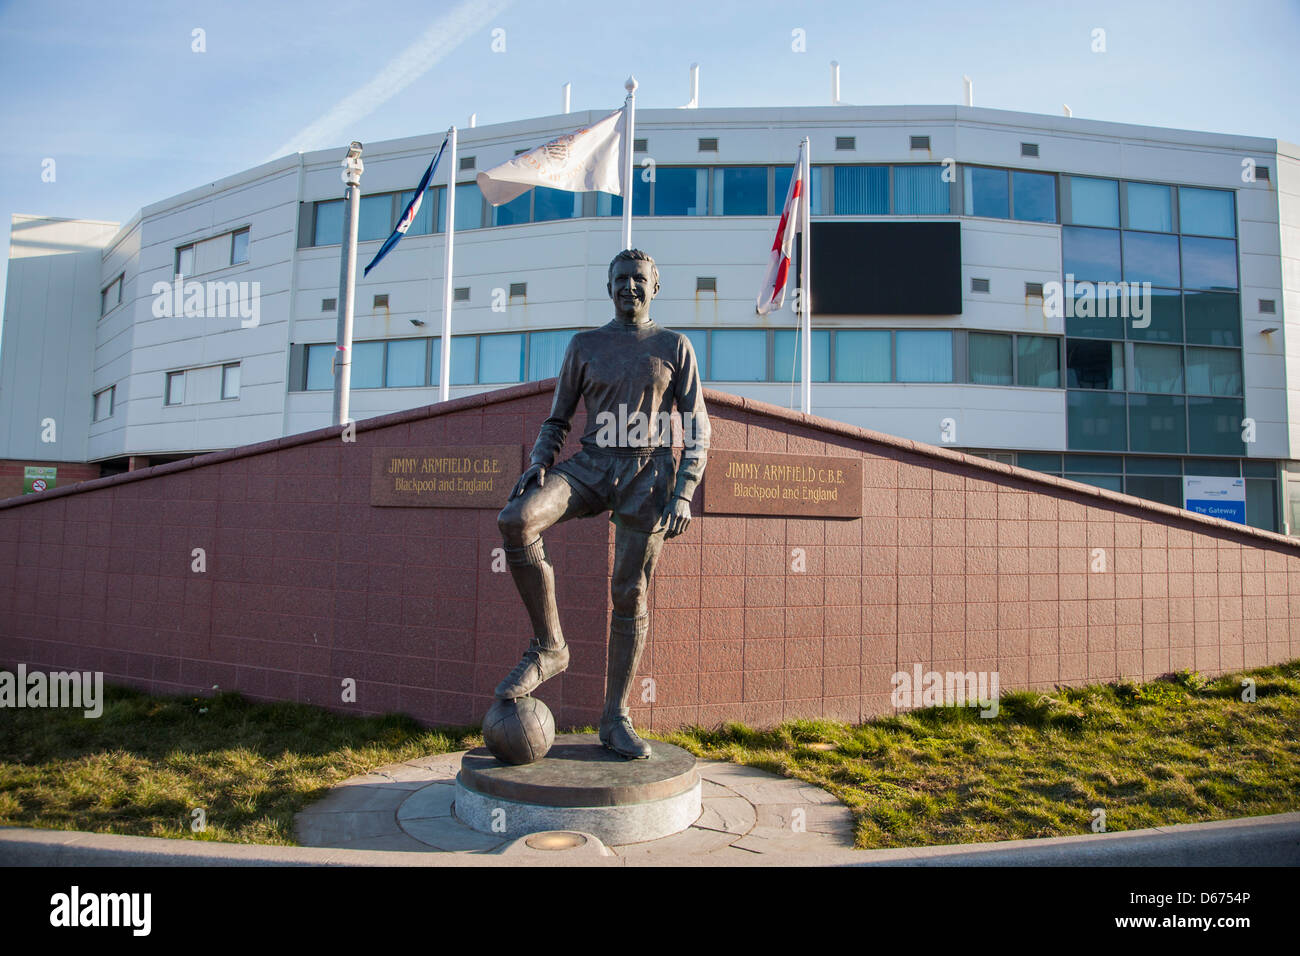 Statue of Jimmy Armfield CBE outside Bloomfield Road Football ground, Blackpool Stock Photo